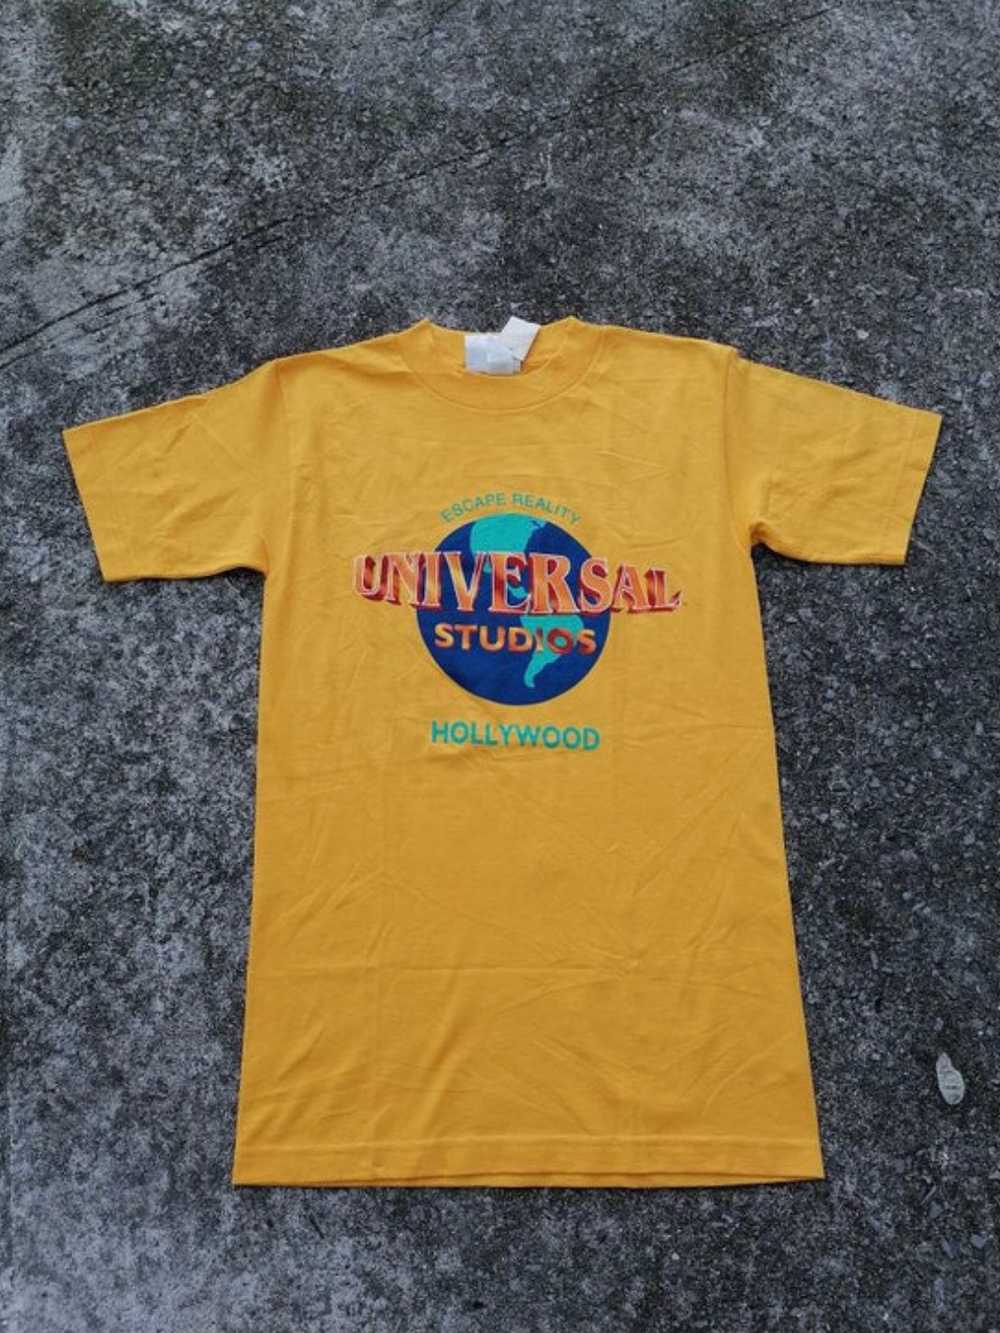 Universal Studios Hollywood Made In USA Tee - image 1